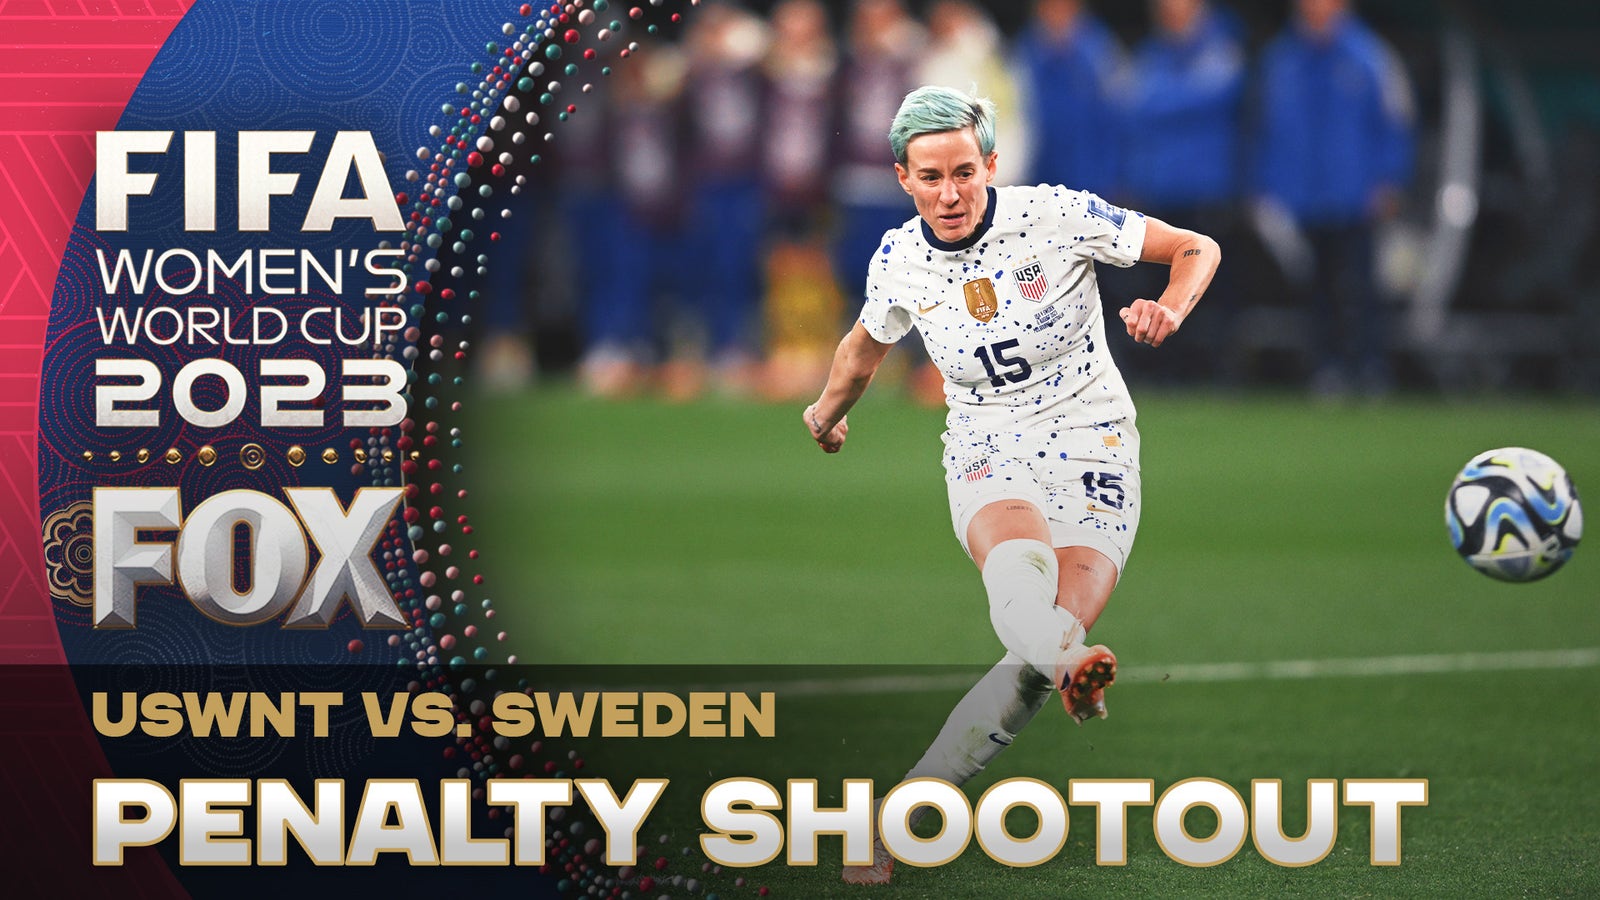 USWNT vs. Sweden: Relive the drama of the entire penalty shootout